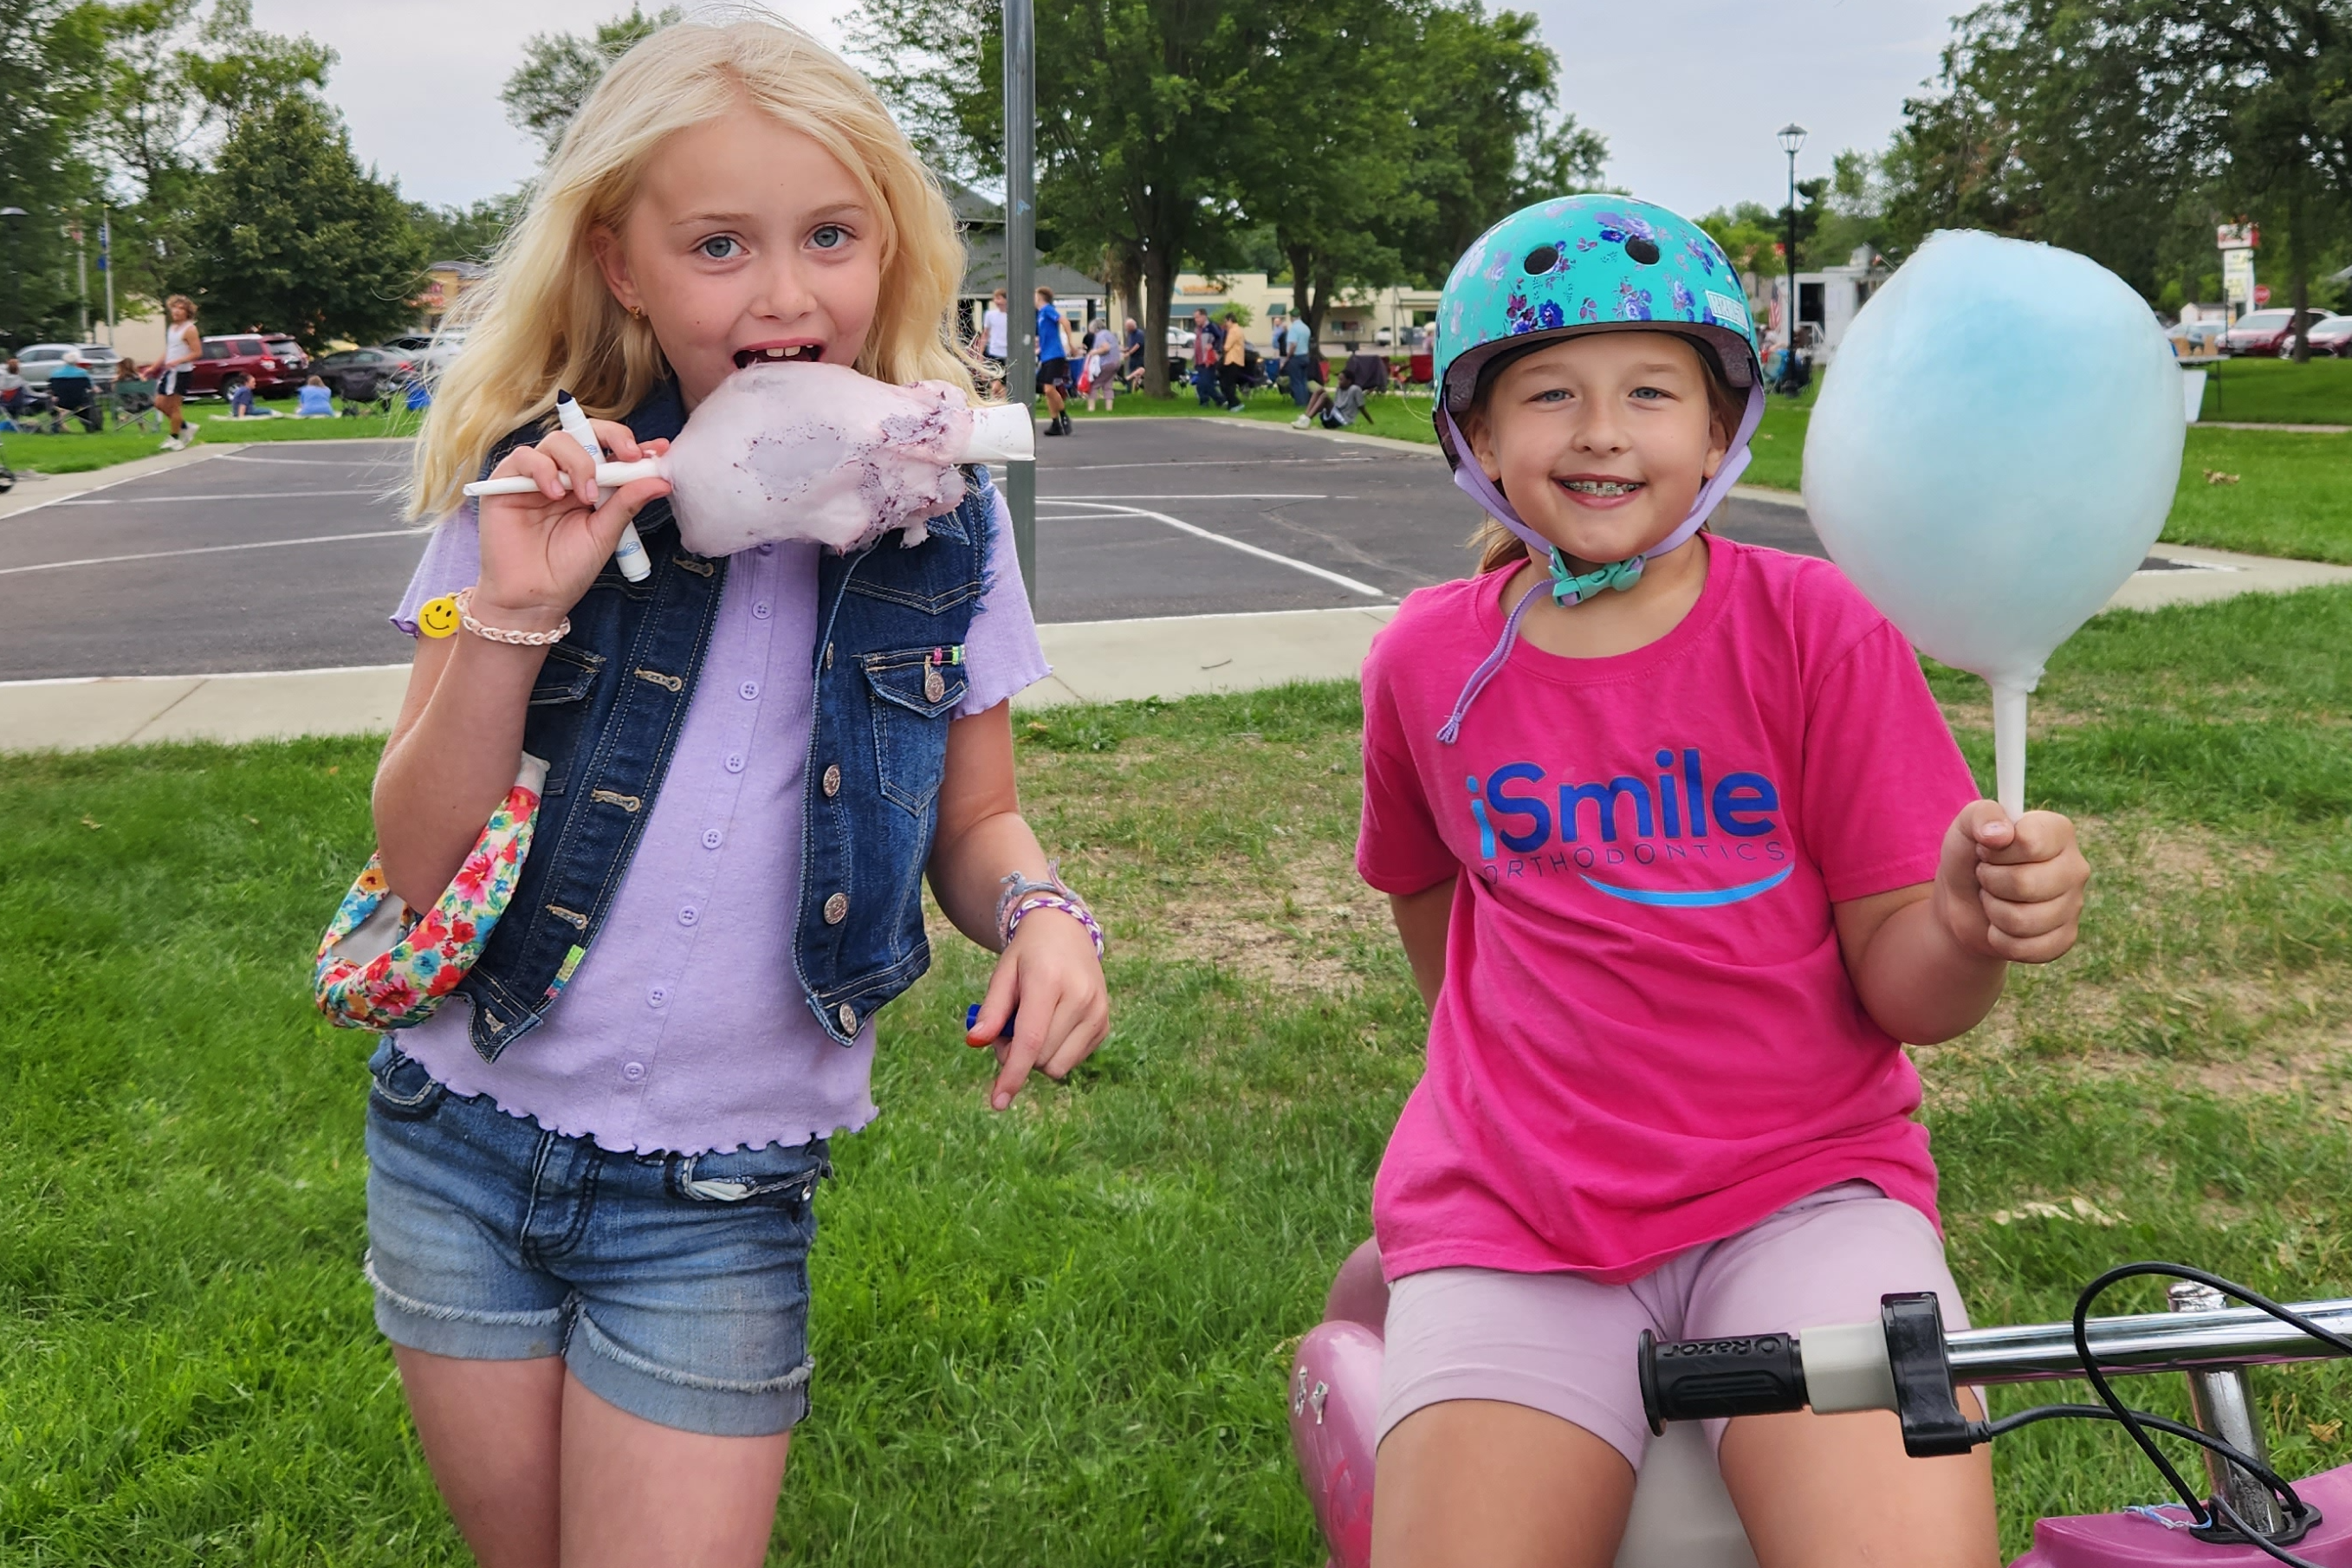 Kids eating cotton candy